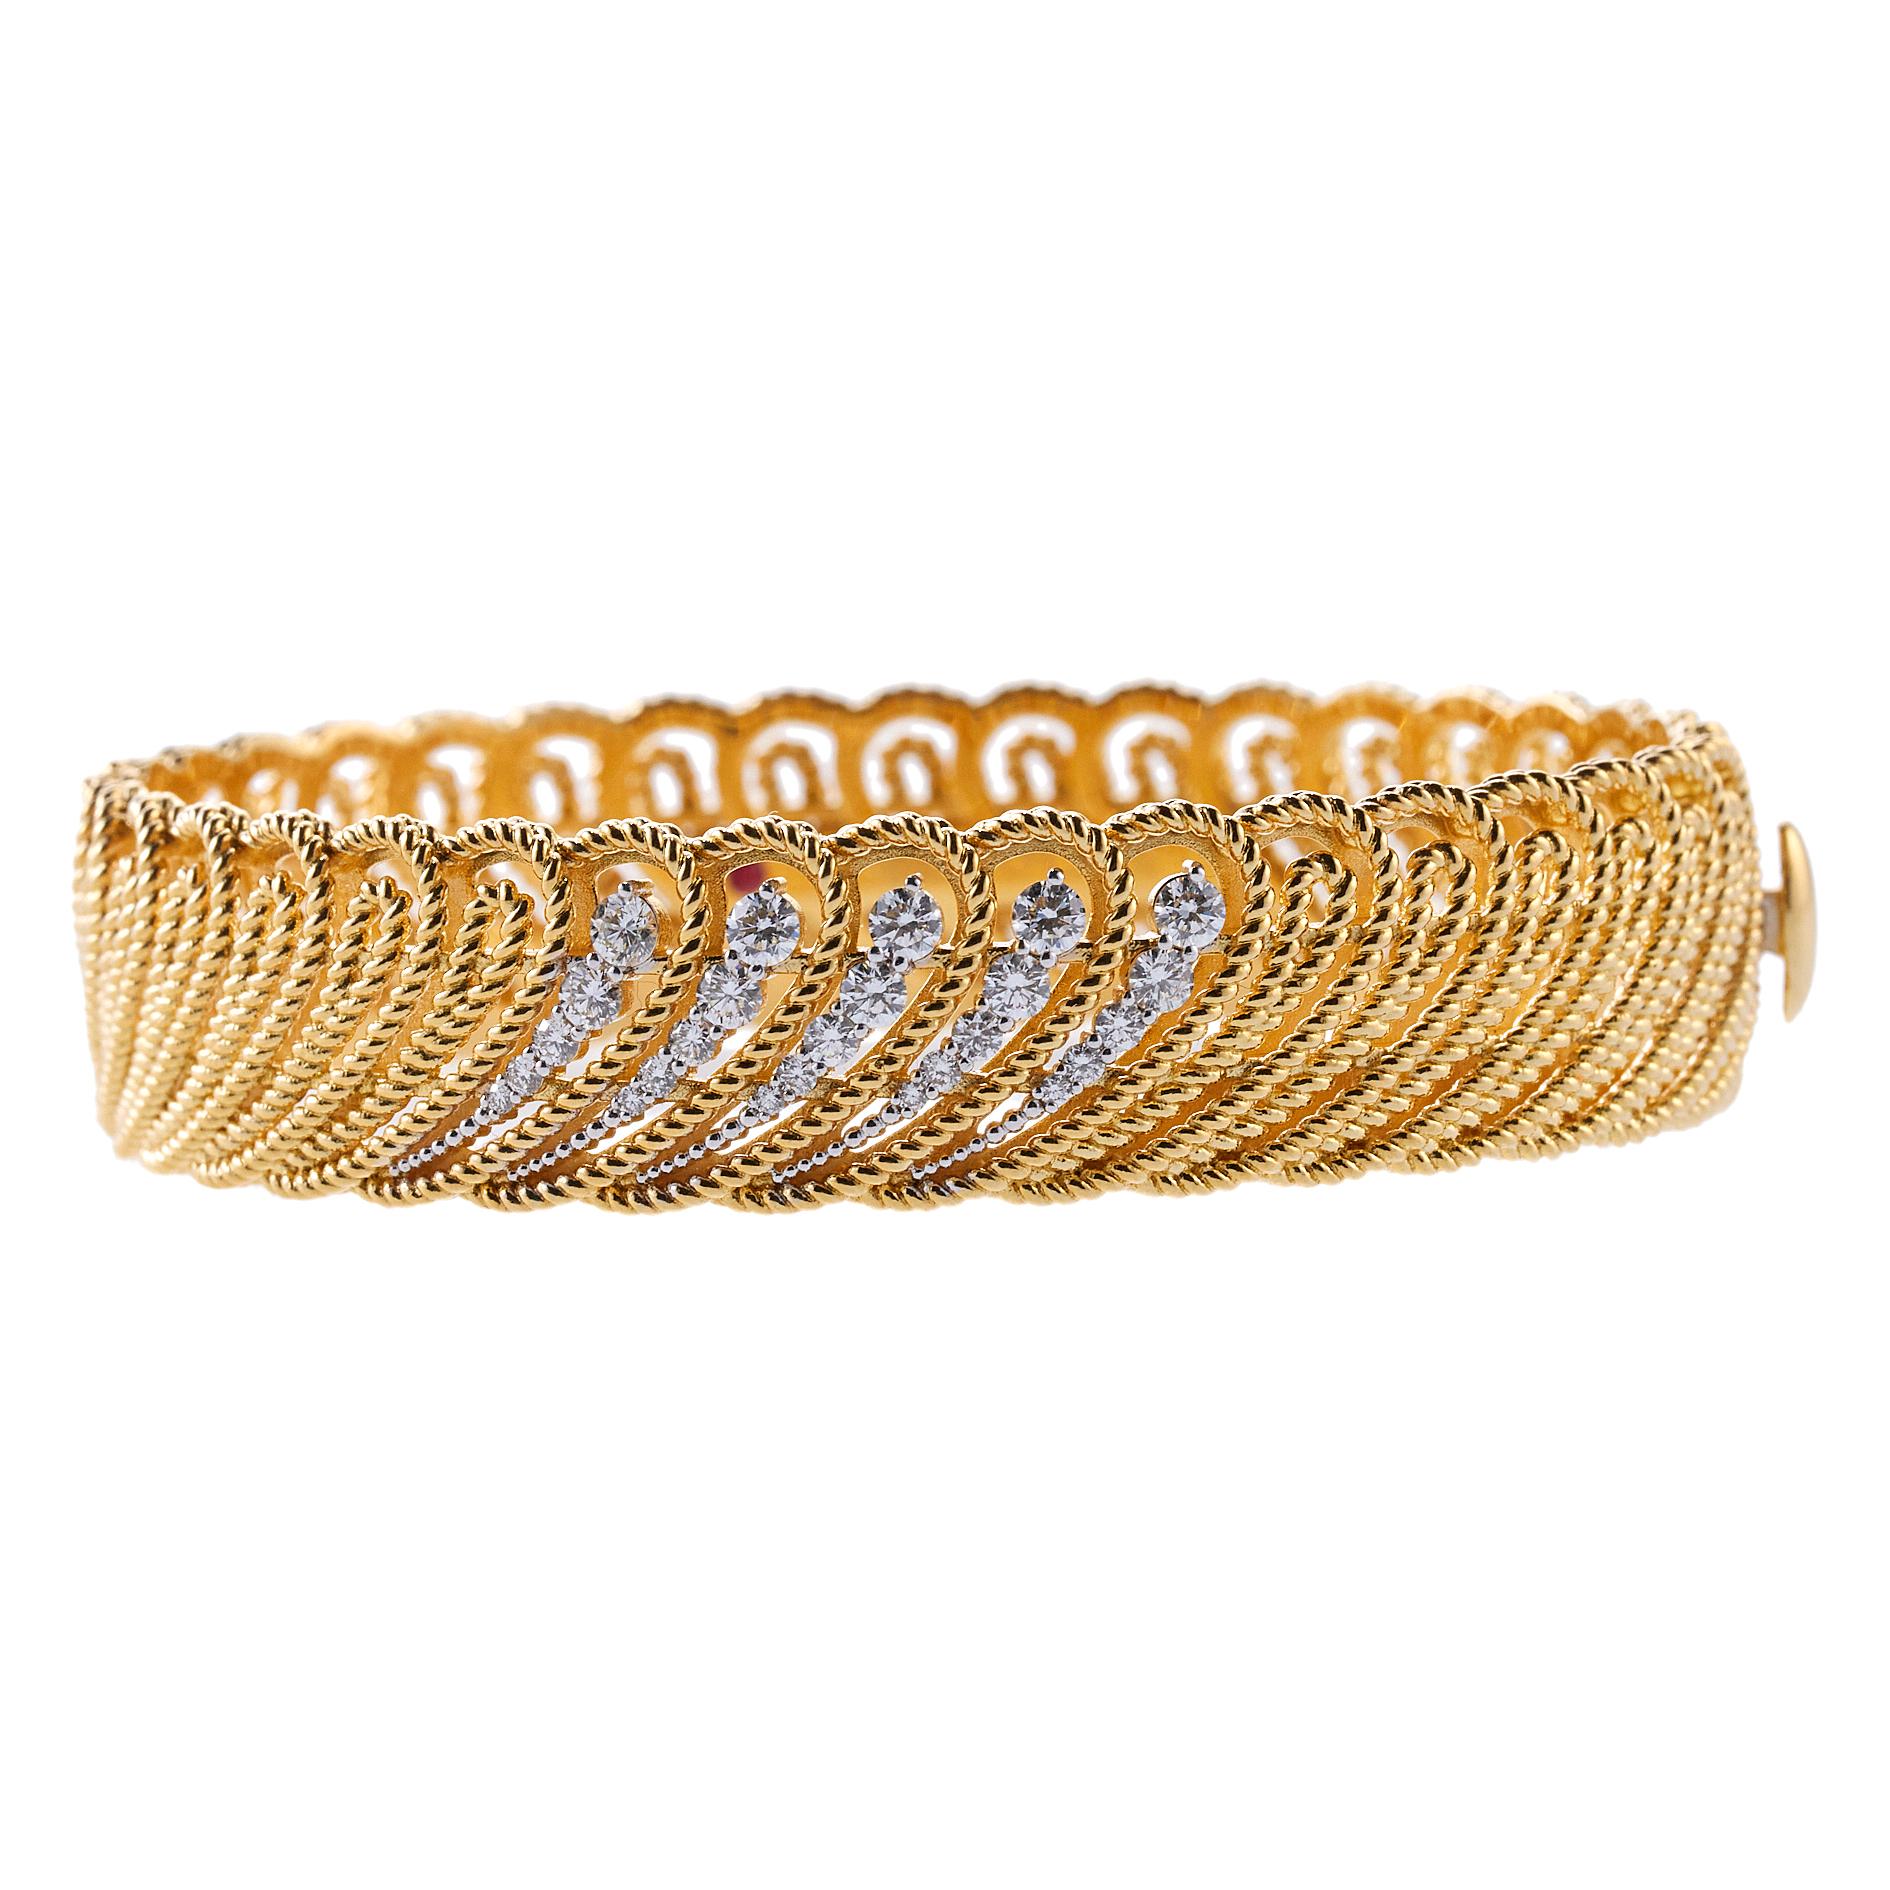 18K yellow gold Roberto Coin bangle bracelet set with 0.75ctw in G/VS diamonds. Bracelet will fit approx. 6.75